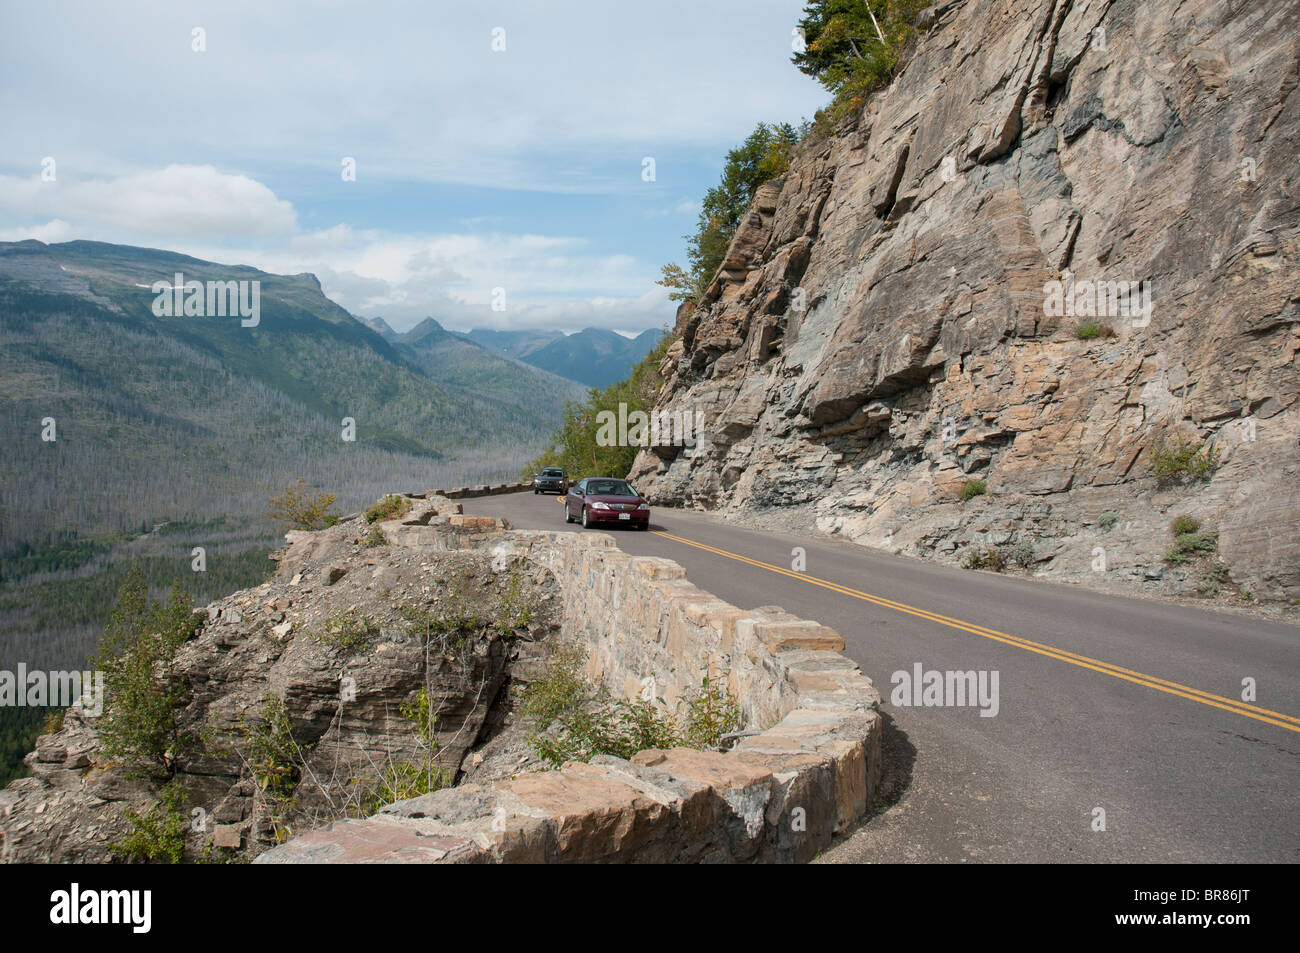 The Going to the Sun Road is a 52 mile long scenic highway that traverses Glacier National Park in Montana. Stock Photo